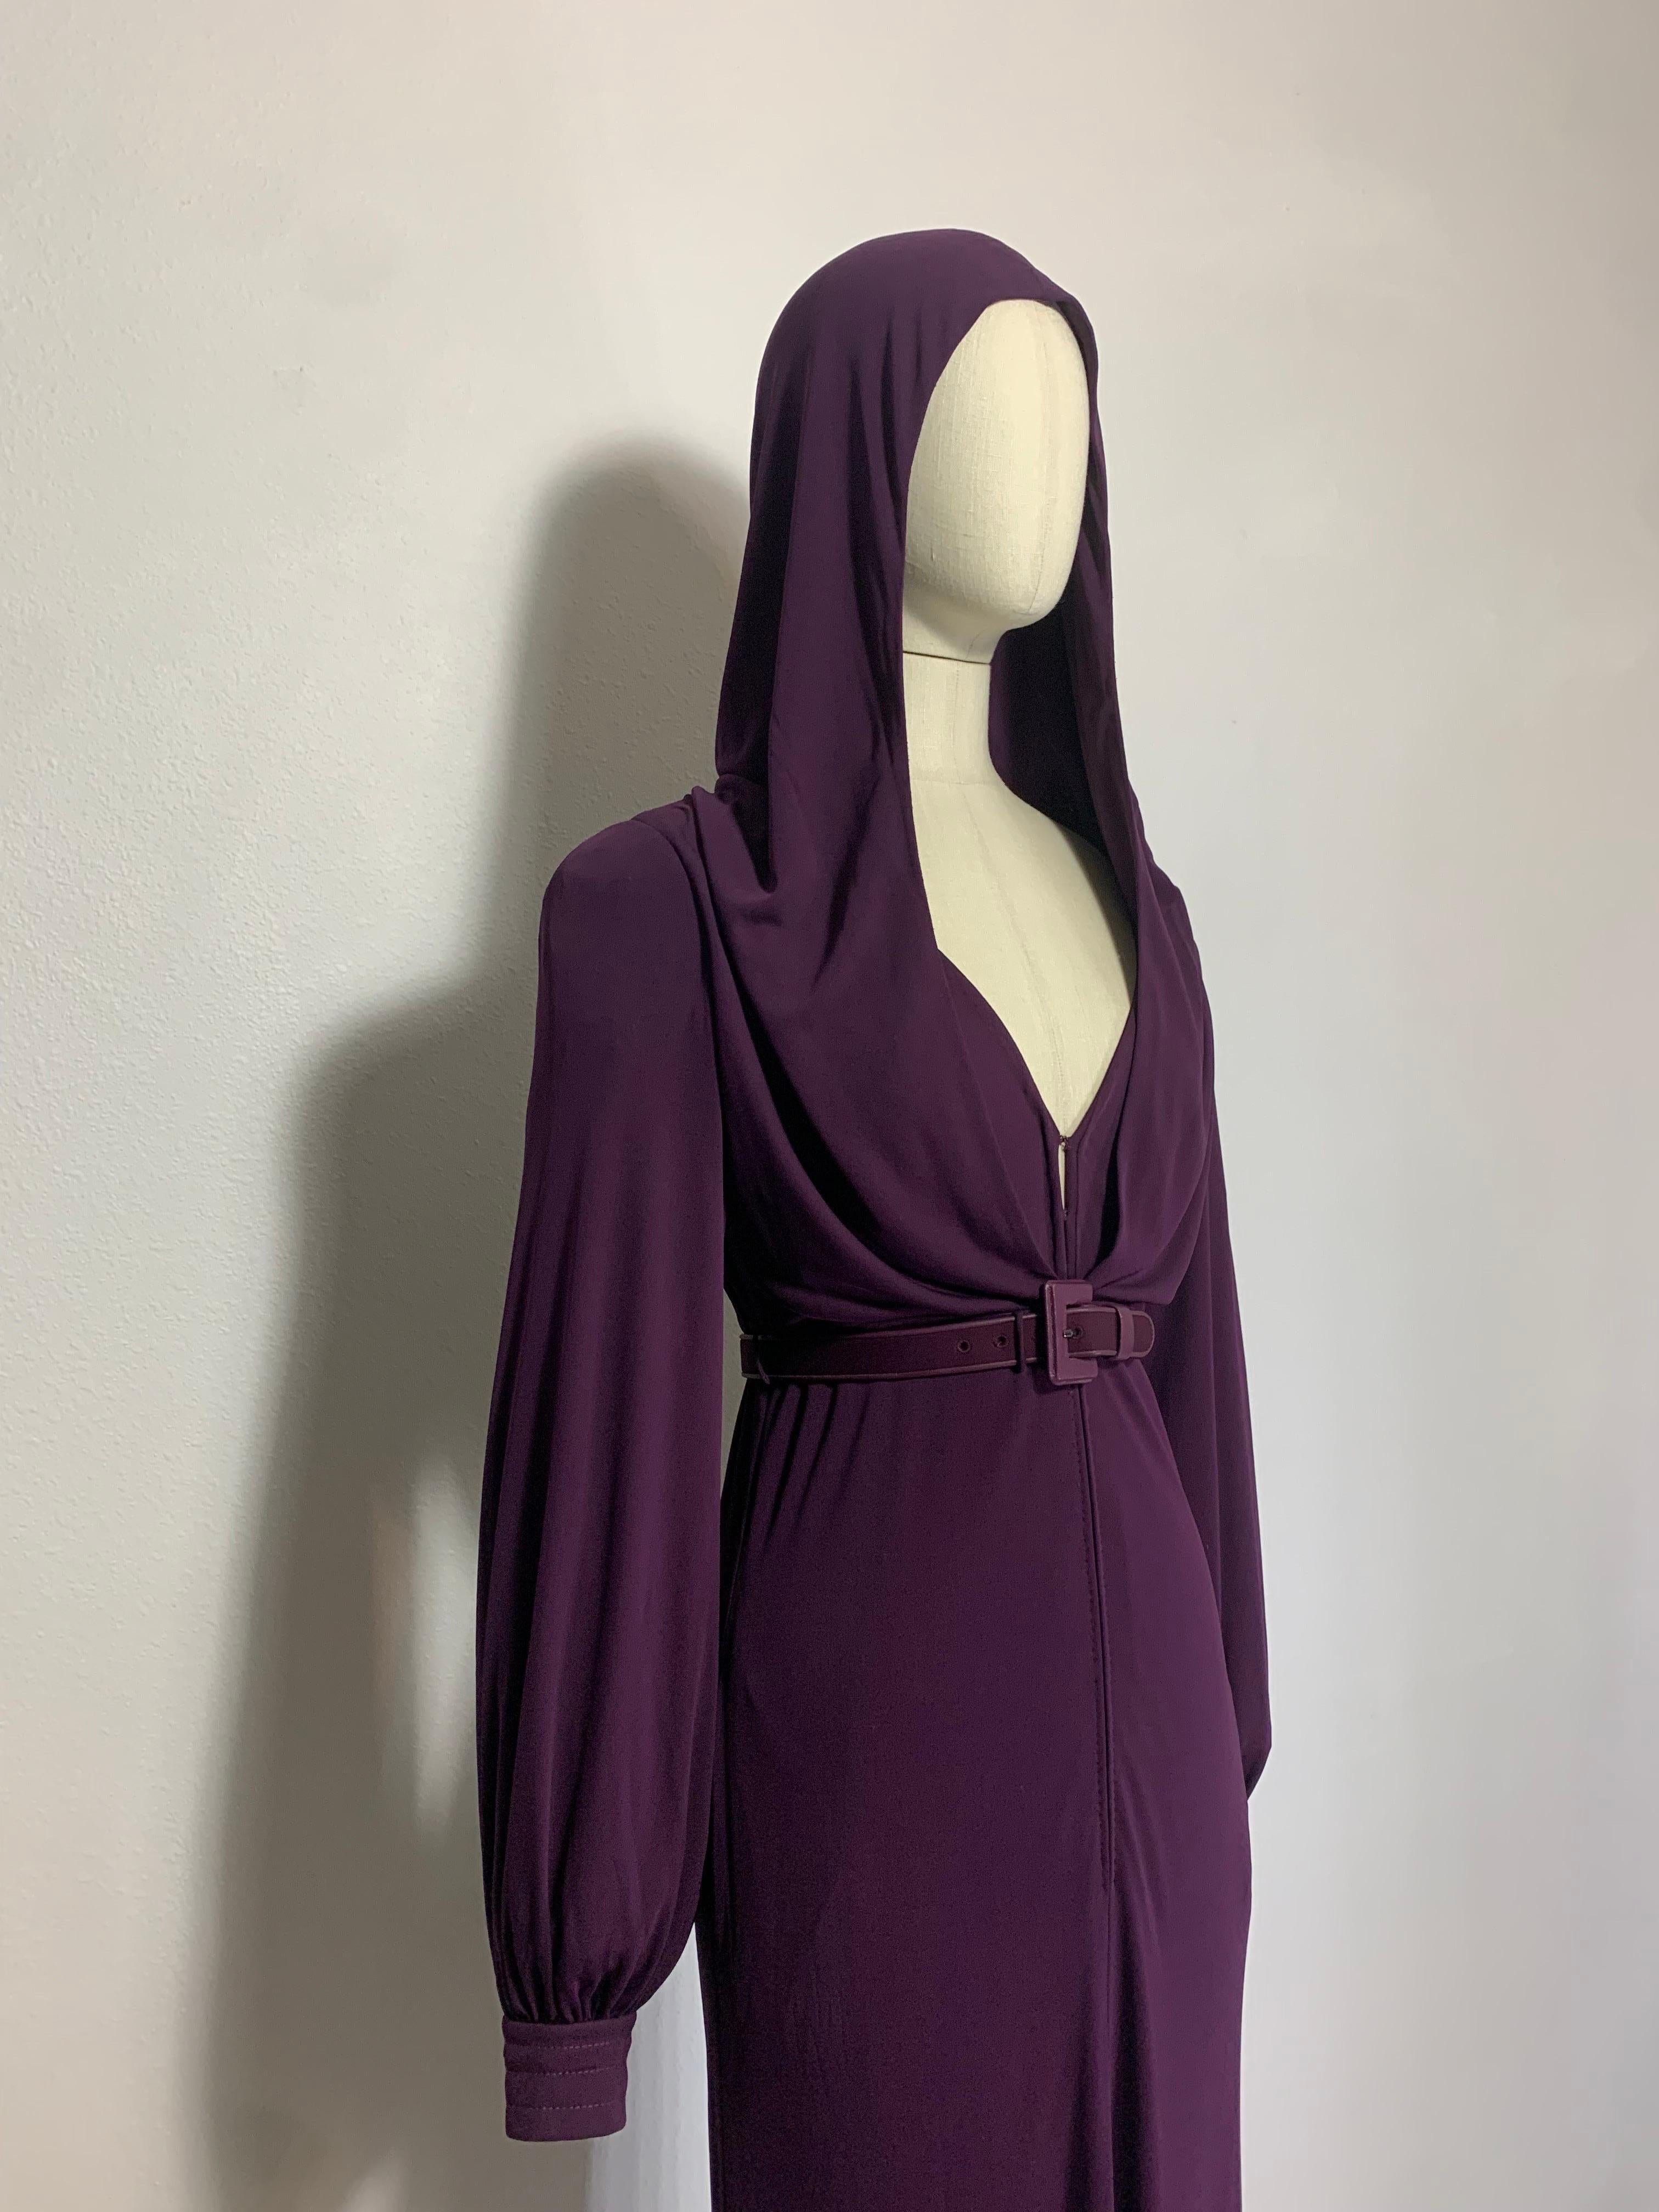 Women's 1975 James Galanos Dramatic Aubergine Jersey Maxi Gown w Fabulous Draped Hood For Sale